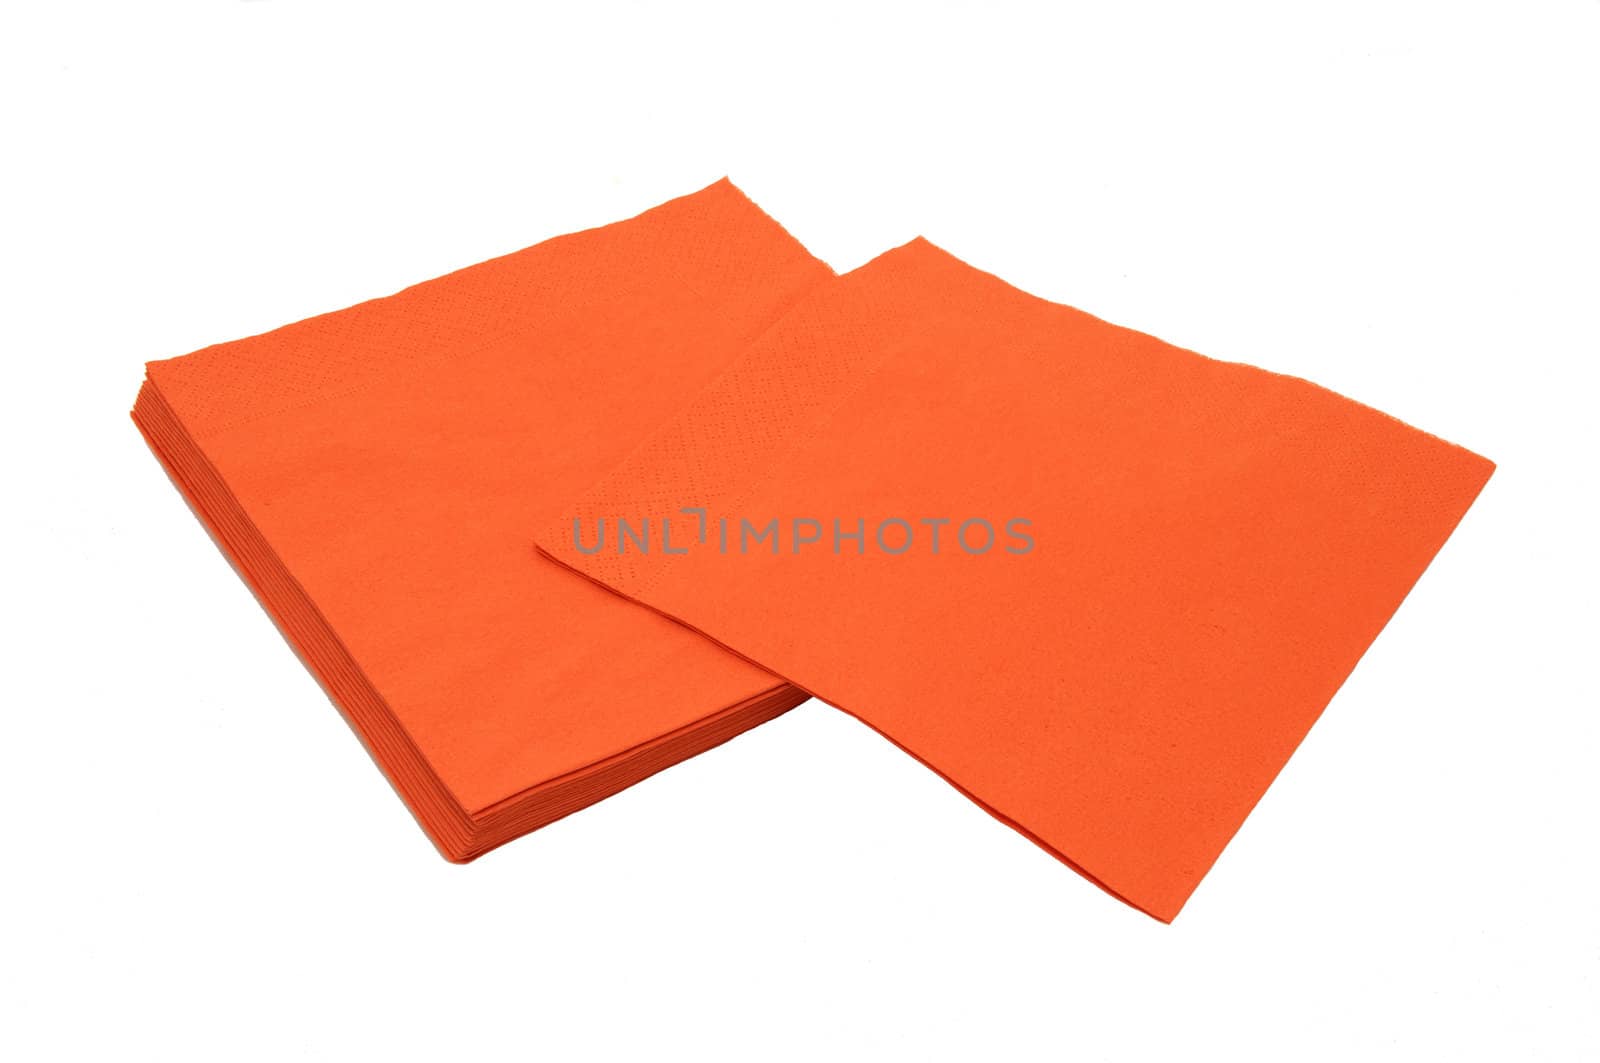 some red tissue paper on white background